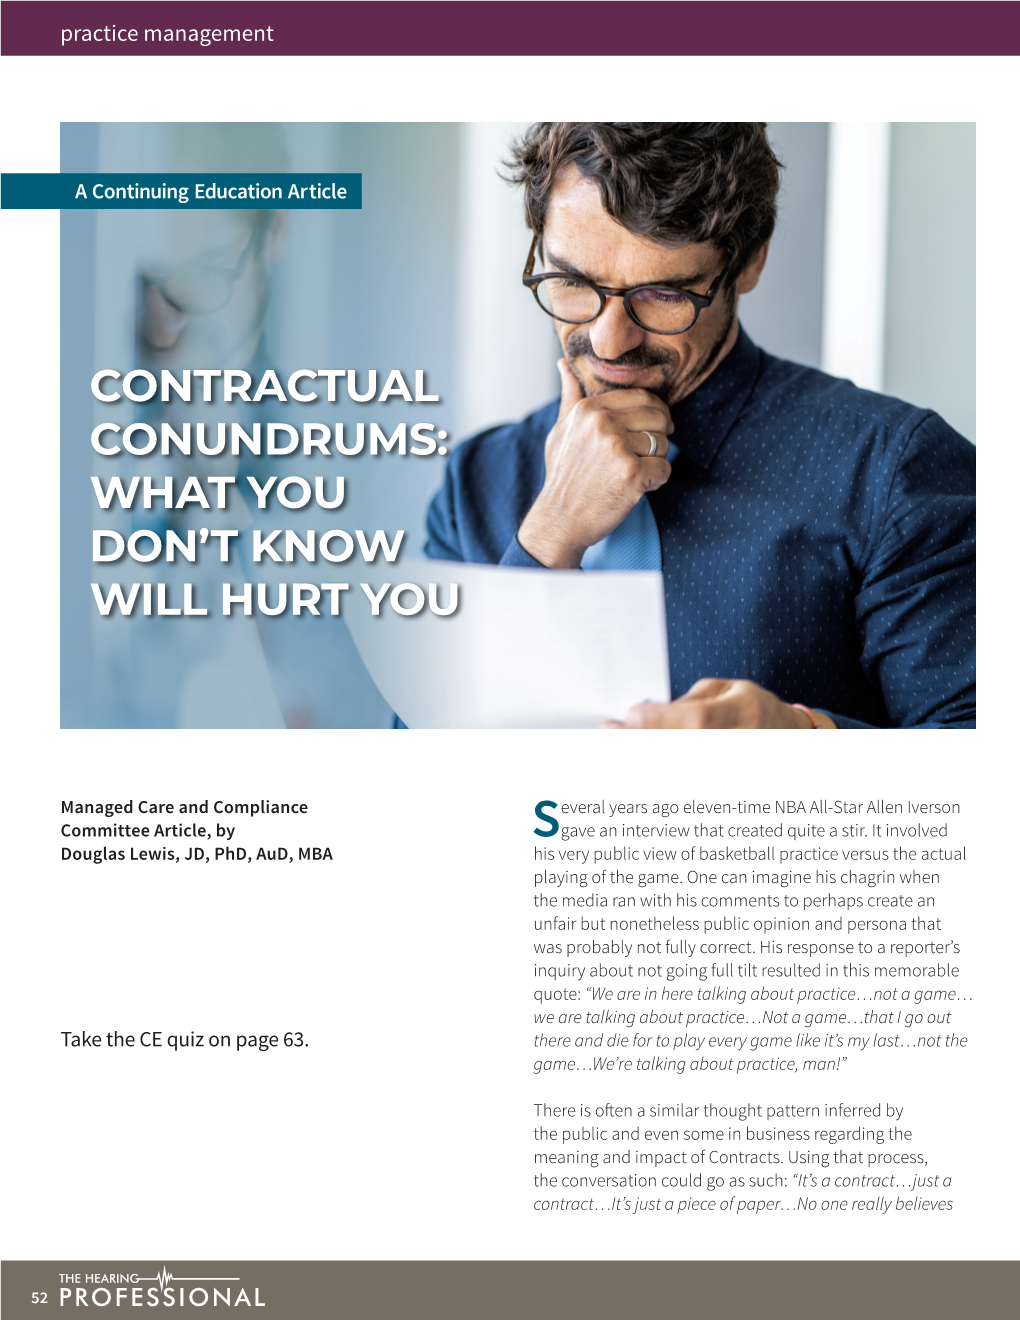 Contractual Conundrums: What You Don’T Know Will Hurt You